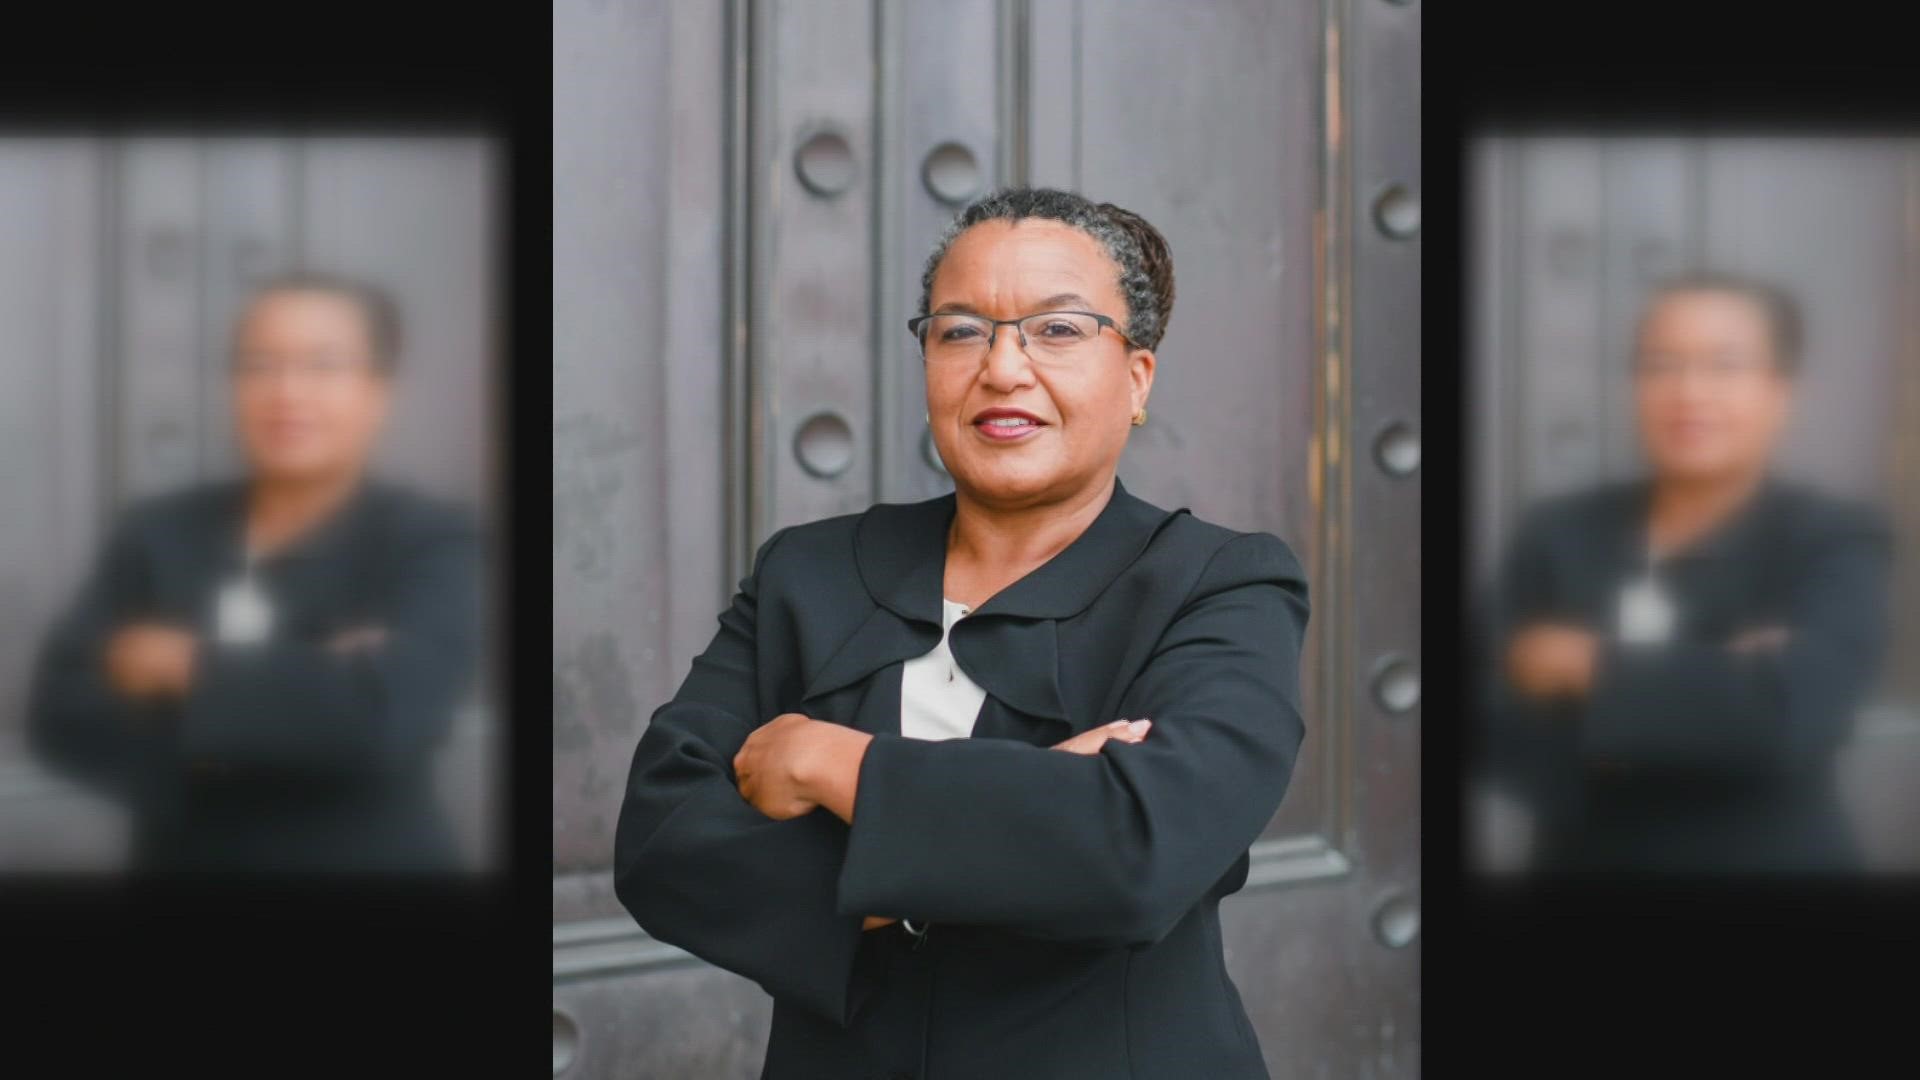 The new NOLA sheriff, Susan Hutson is ready to make history as Louisiana's first black woman sheriff and eager to start the work.